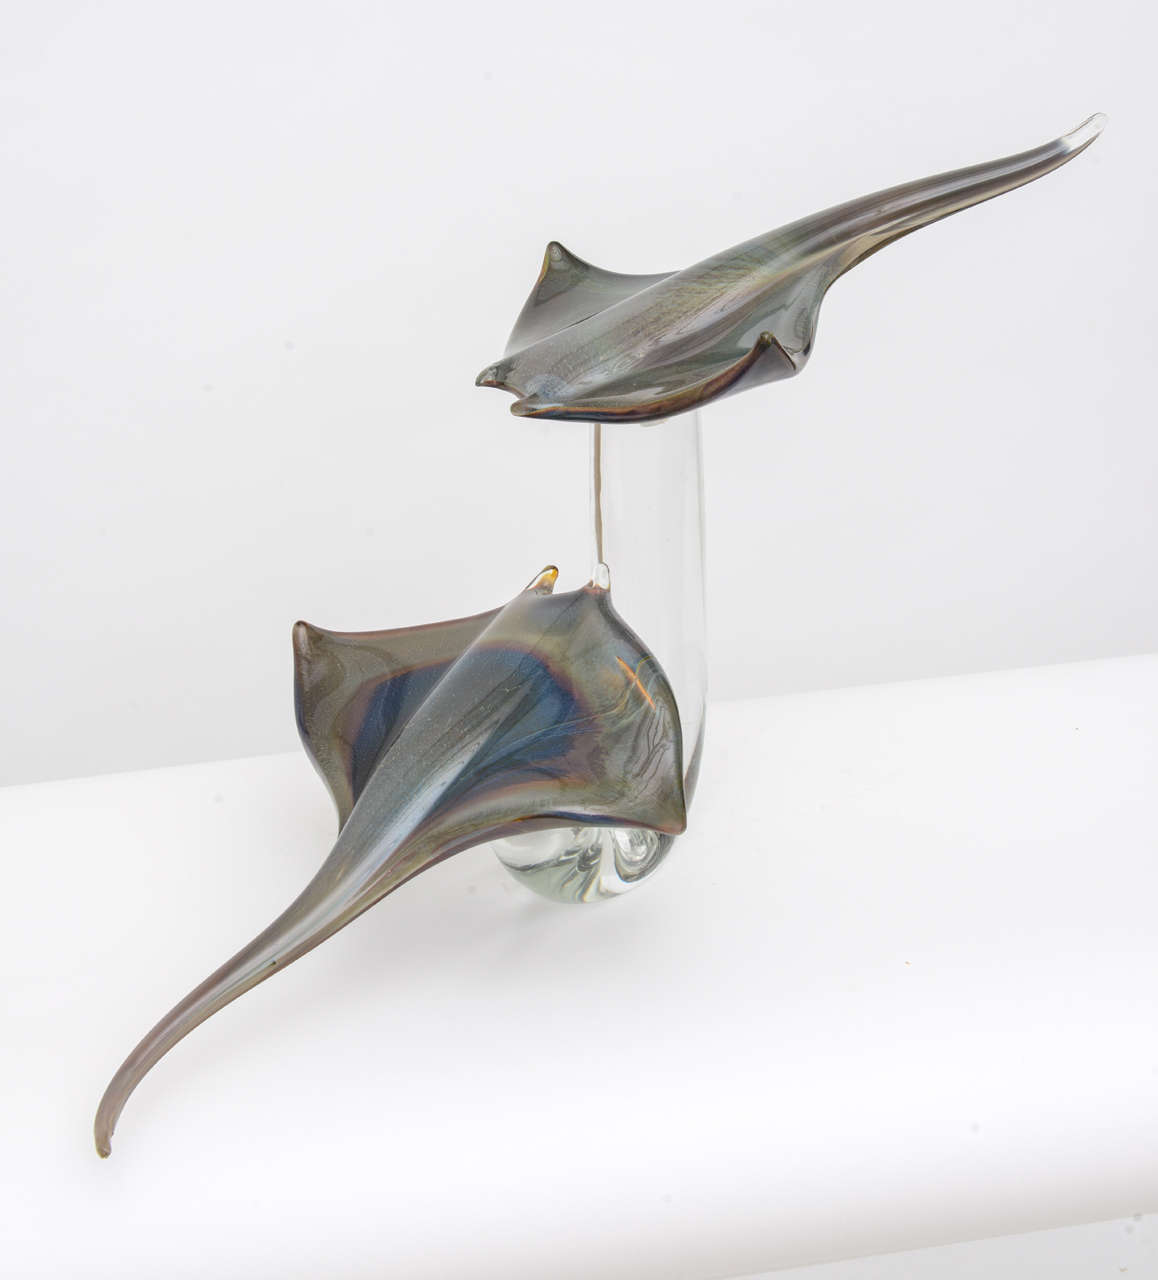 Handblown in Murano, Italy, using the massello technique, this exceptional sculpture consists of two handblown glass fish mounted on a solid tubular curved crystal base. The coloration of the rays varies fantastically from blues to greens with golds